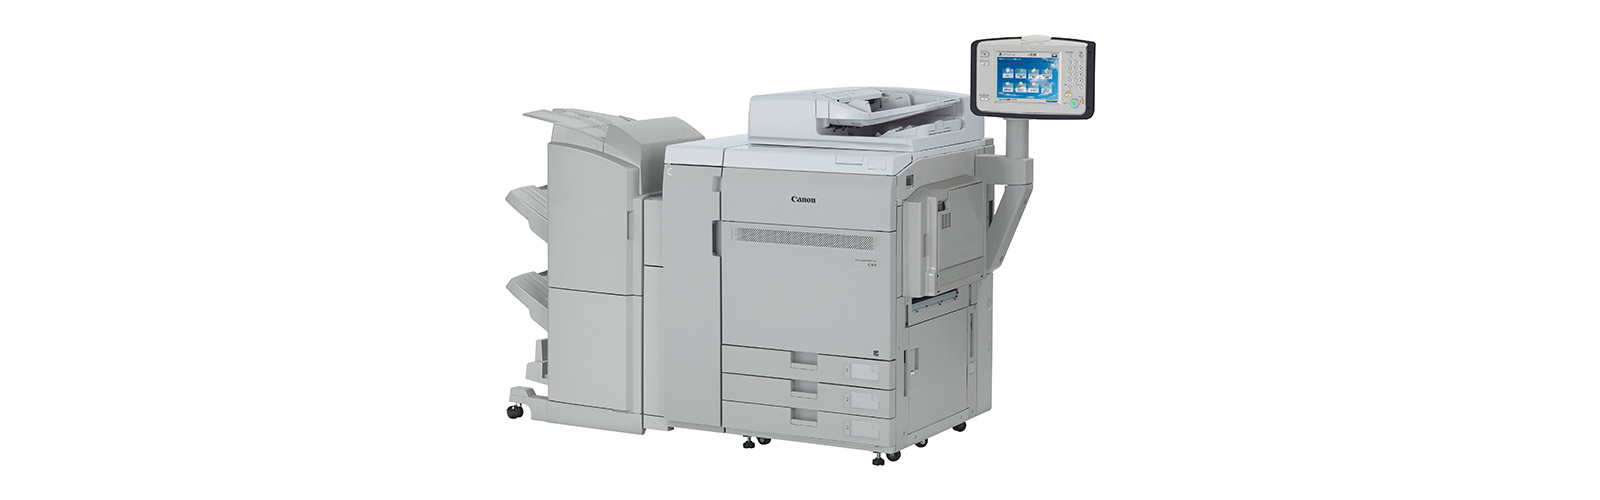 Canon imagePRESS C65 Production Print System